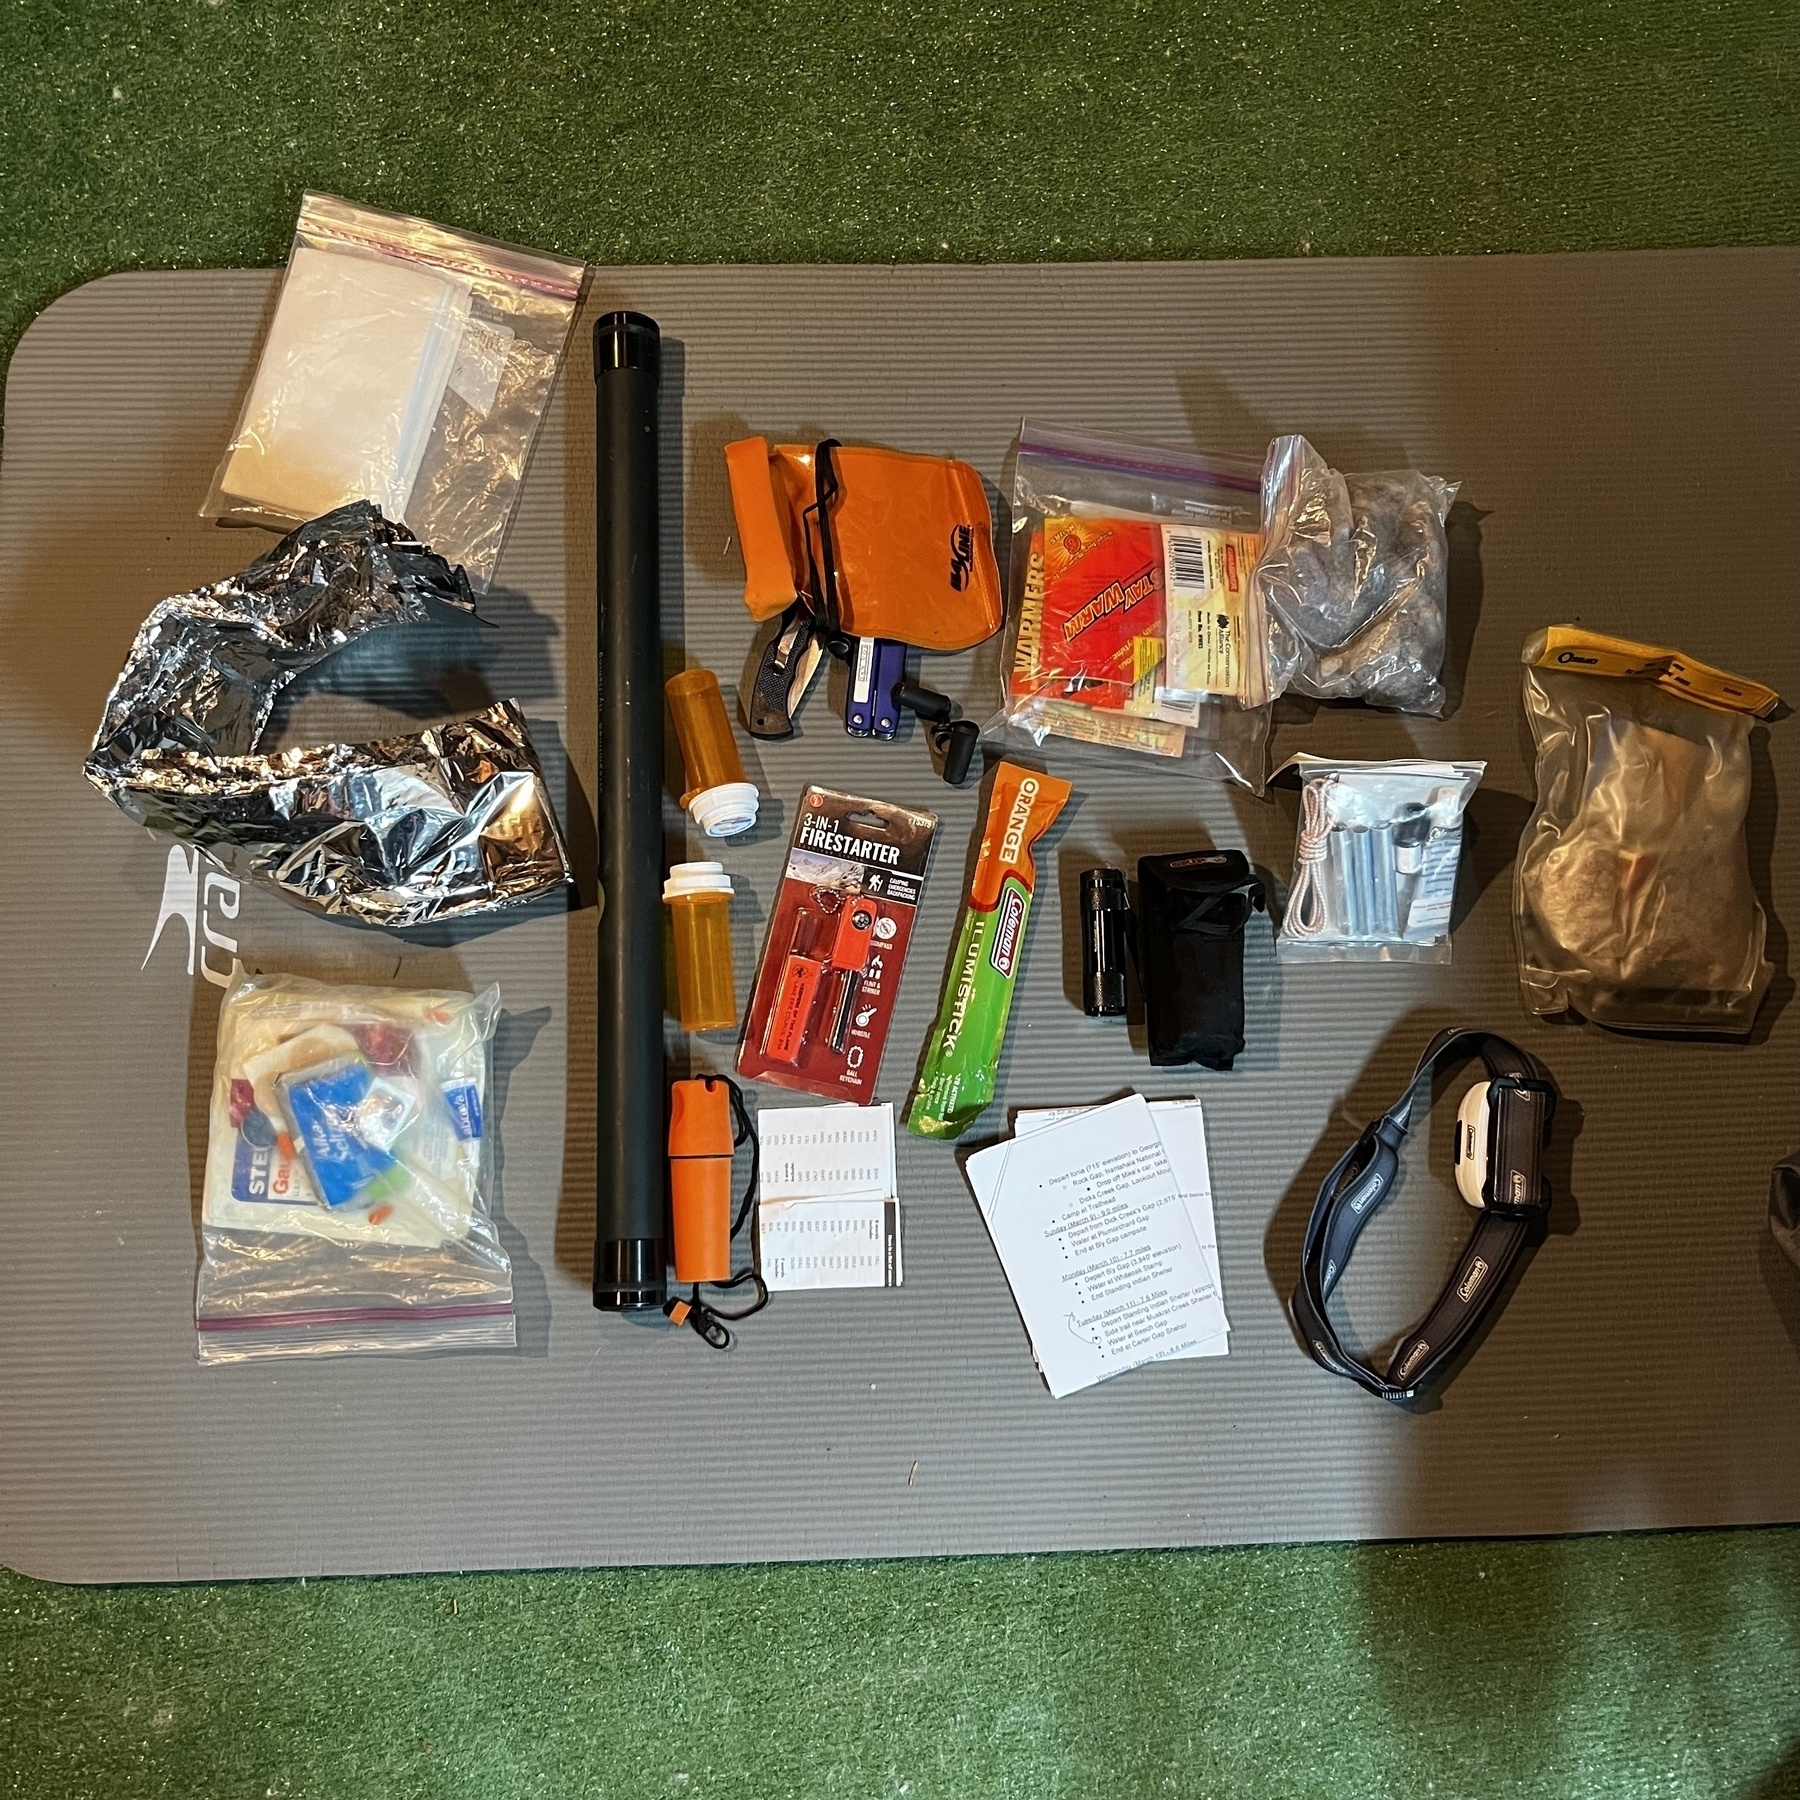 Fire starters, knives, flashlights, bags, and first aid supplies.